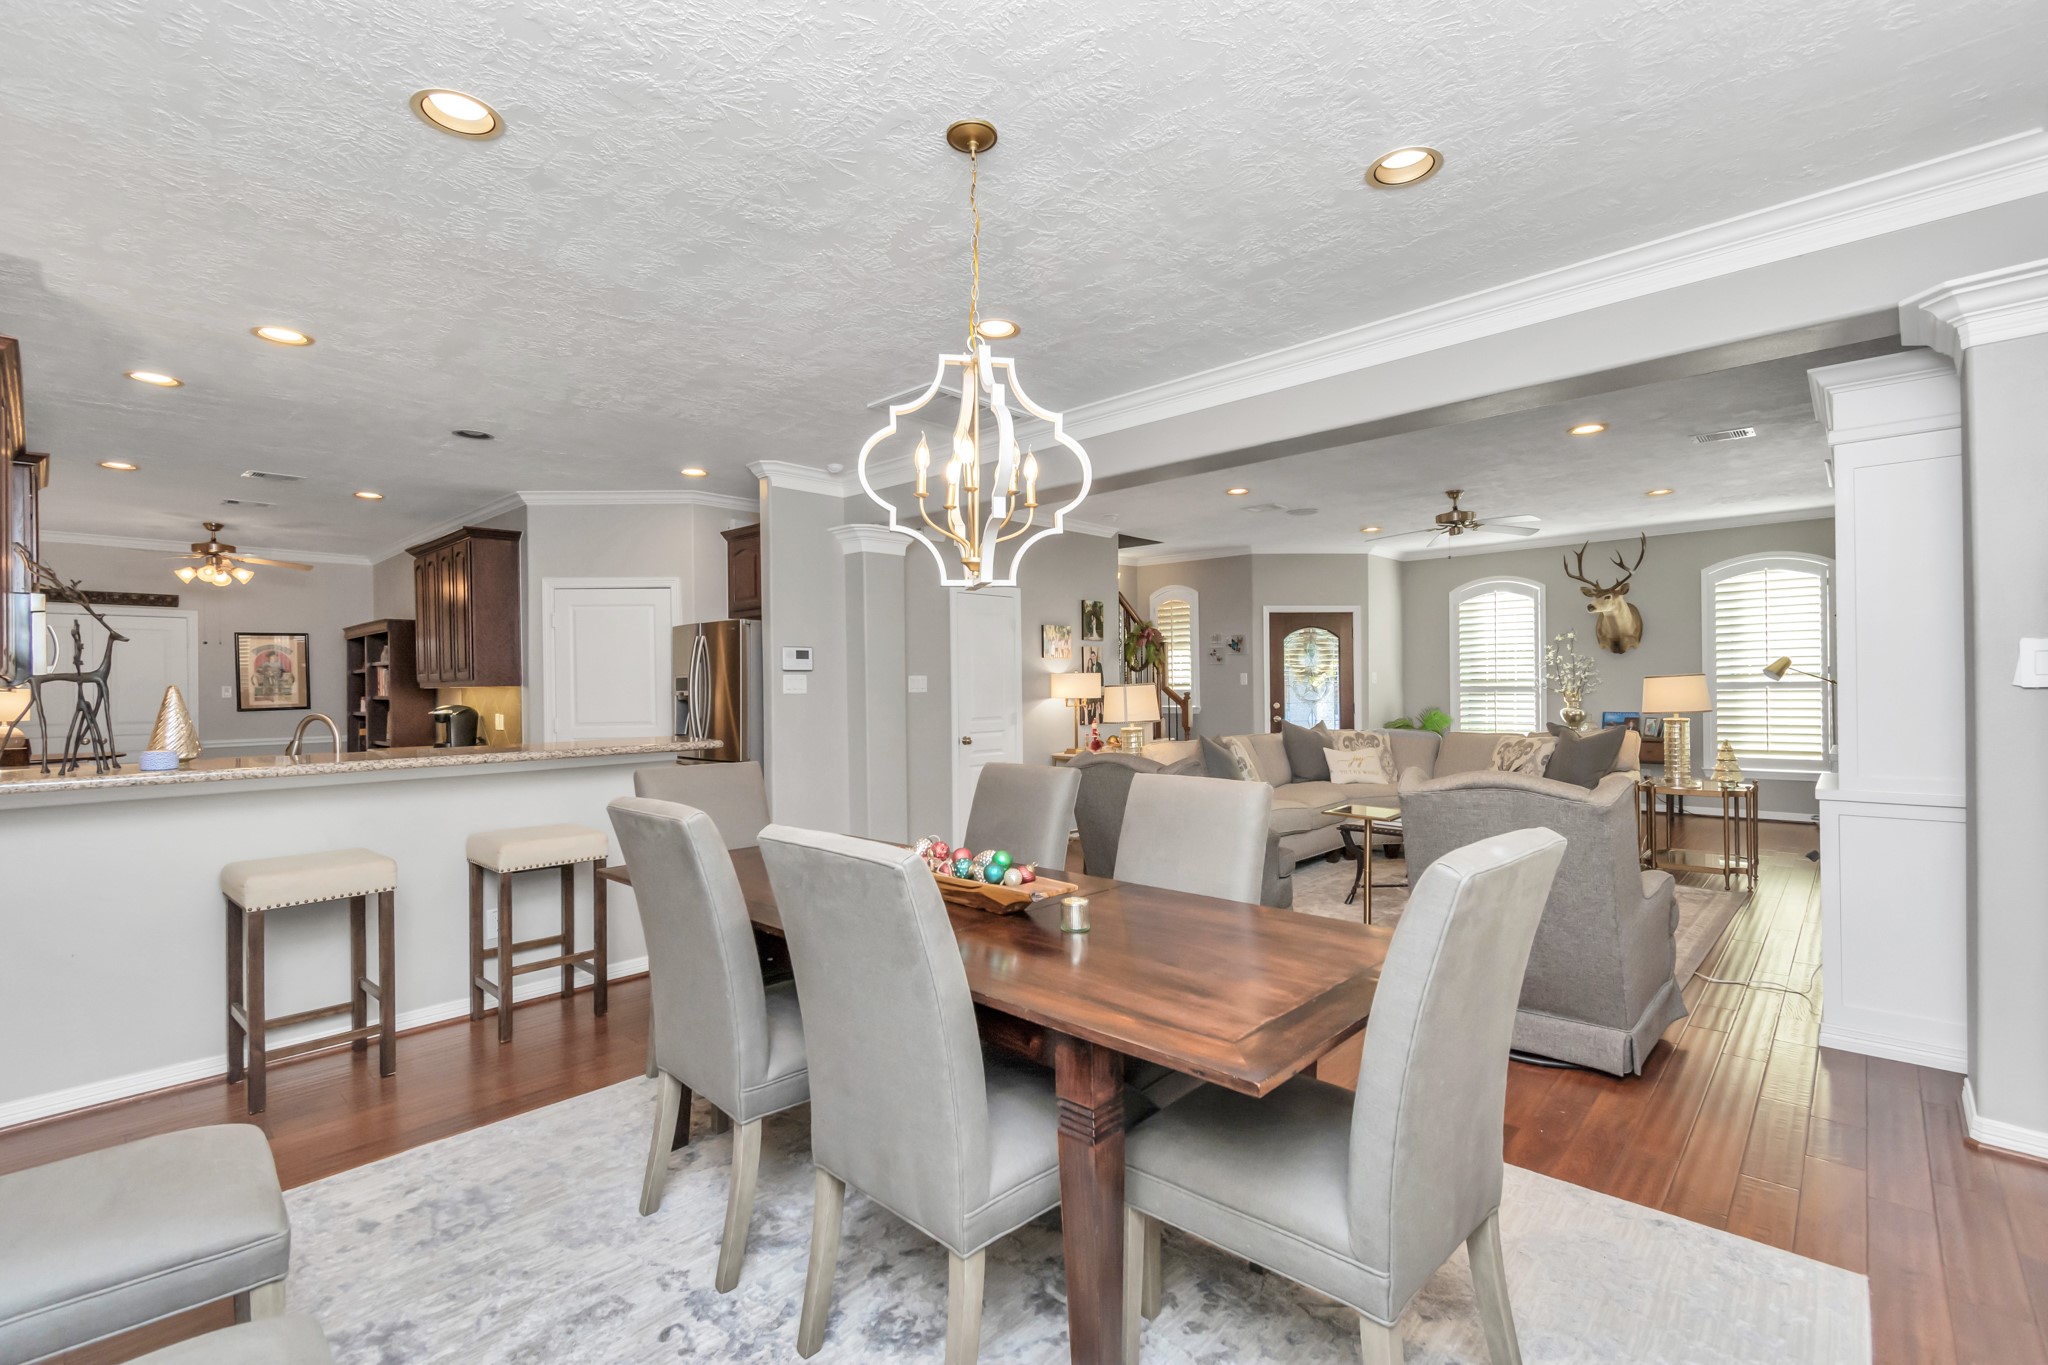 Adjacent to the den, a generously sized dining room fosters conversation and easy accessibility, creating a harmonious flow within the living space.